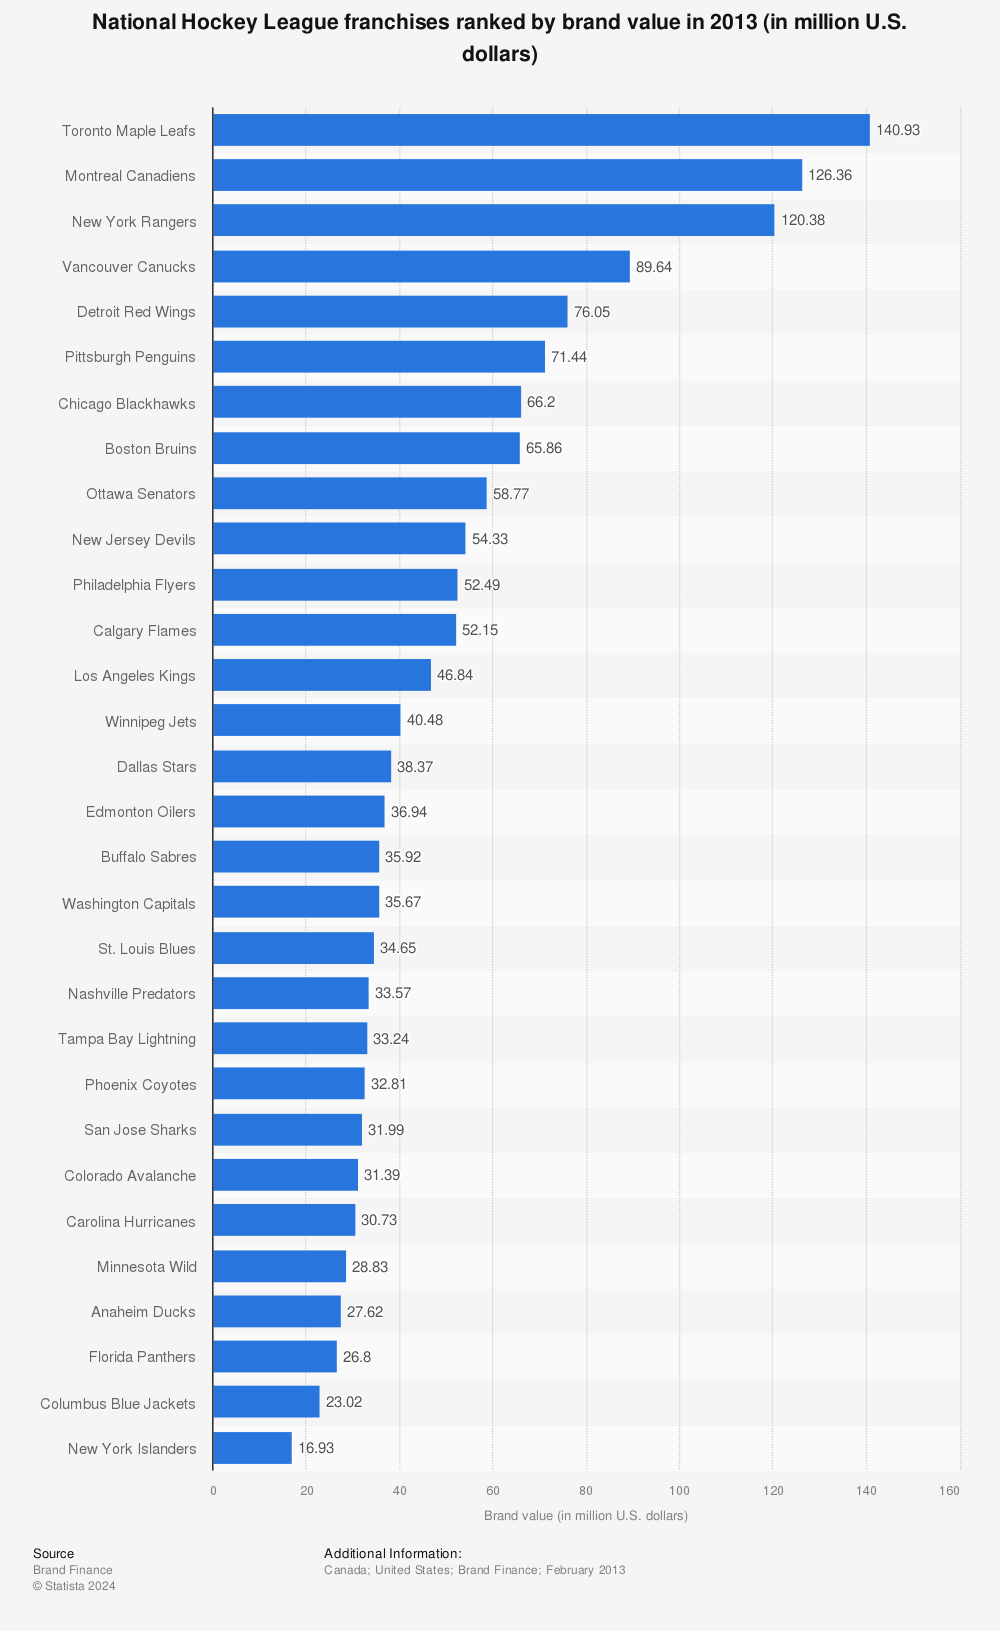 Statistic: National Hockey League franchises ranked by brand value in 2013 (in million U.S. dollars) | Statista